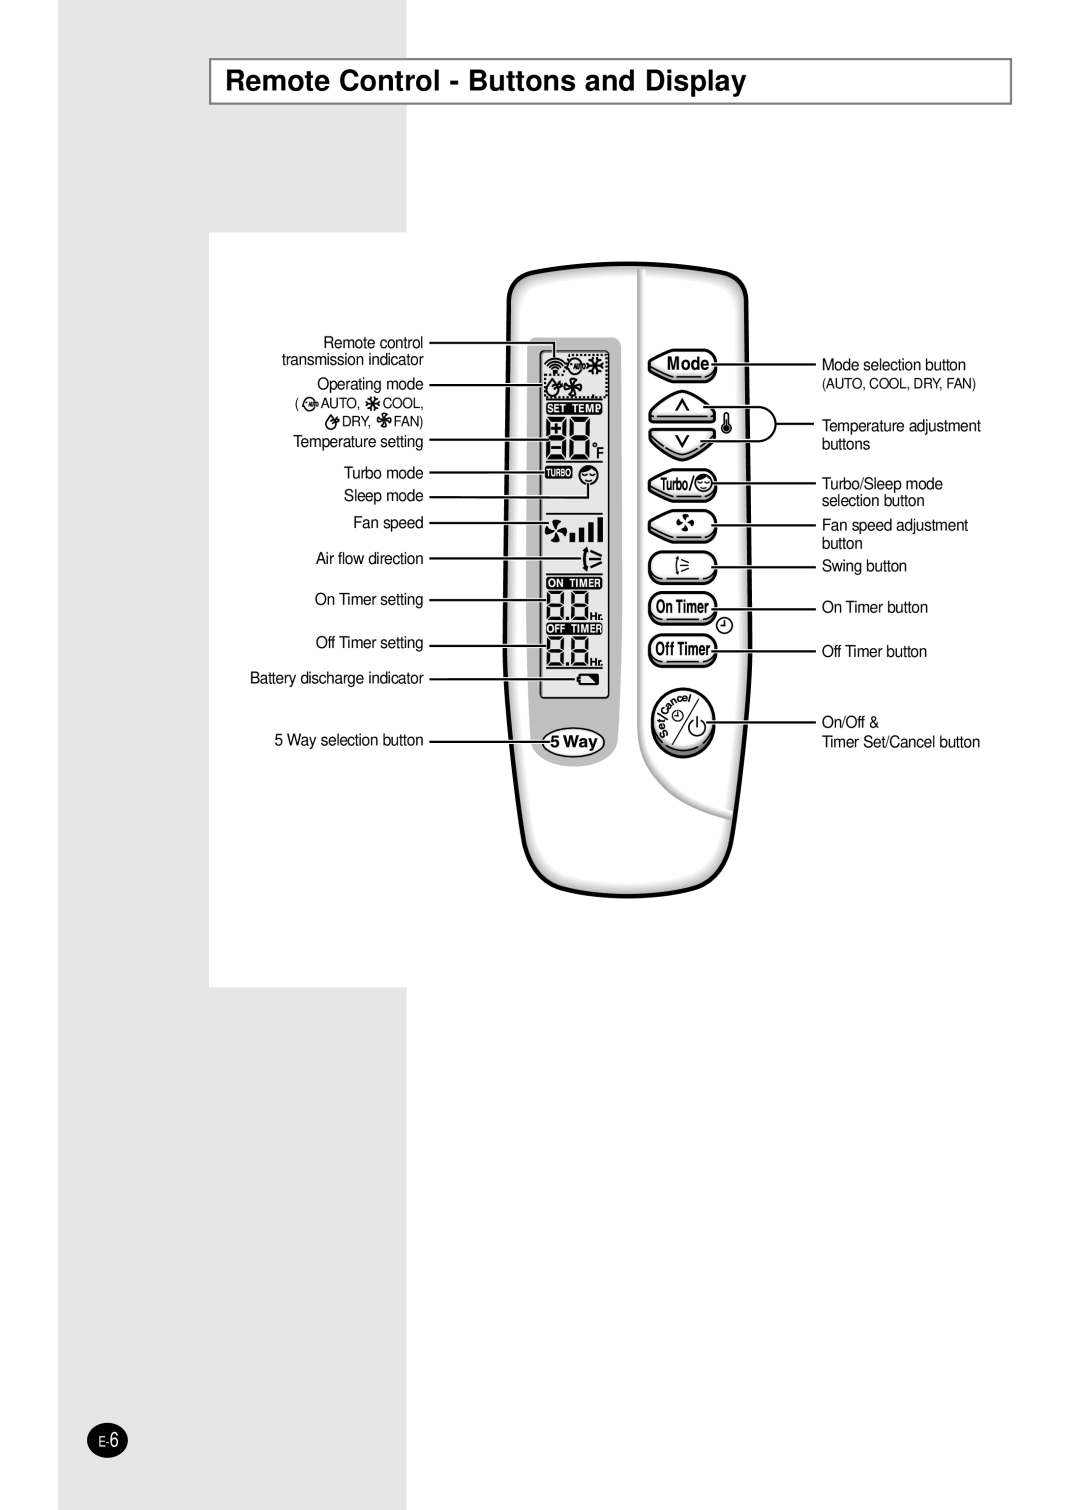 Samsung AM18B1(B2)C09 installation manual Remote Control - Buttons and Display 